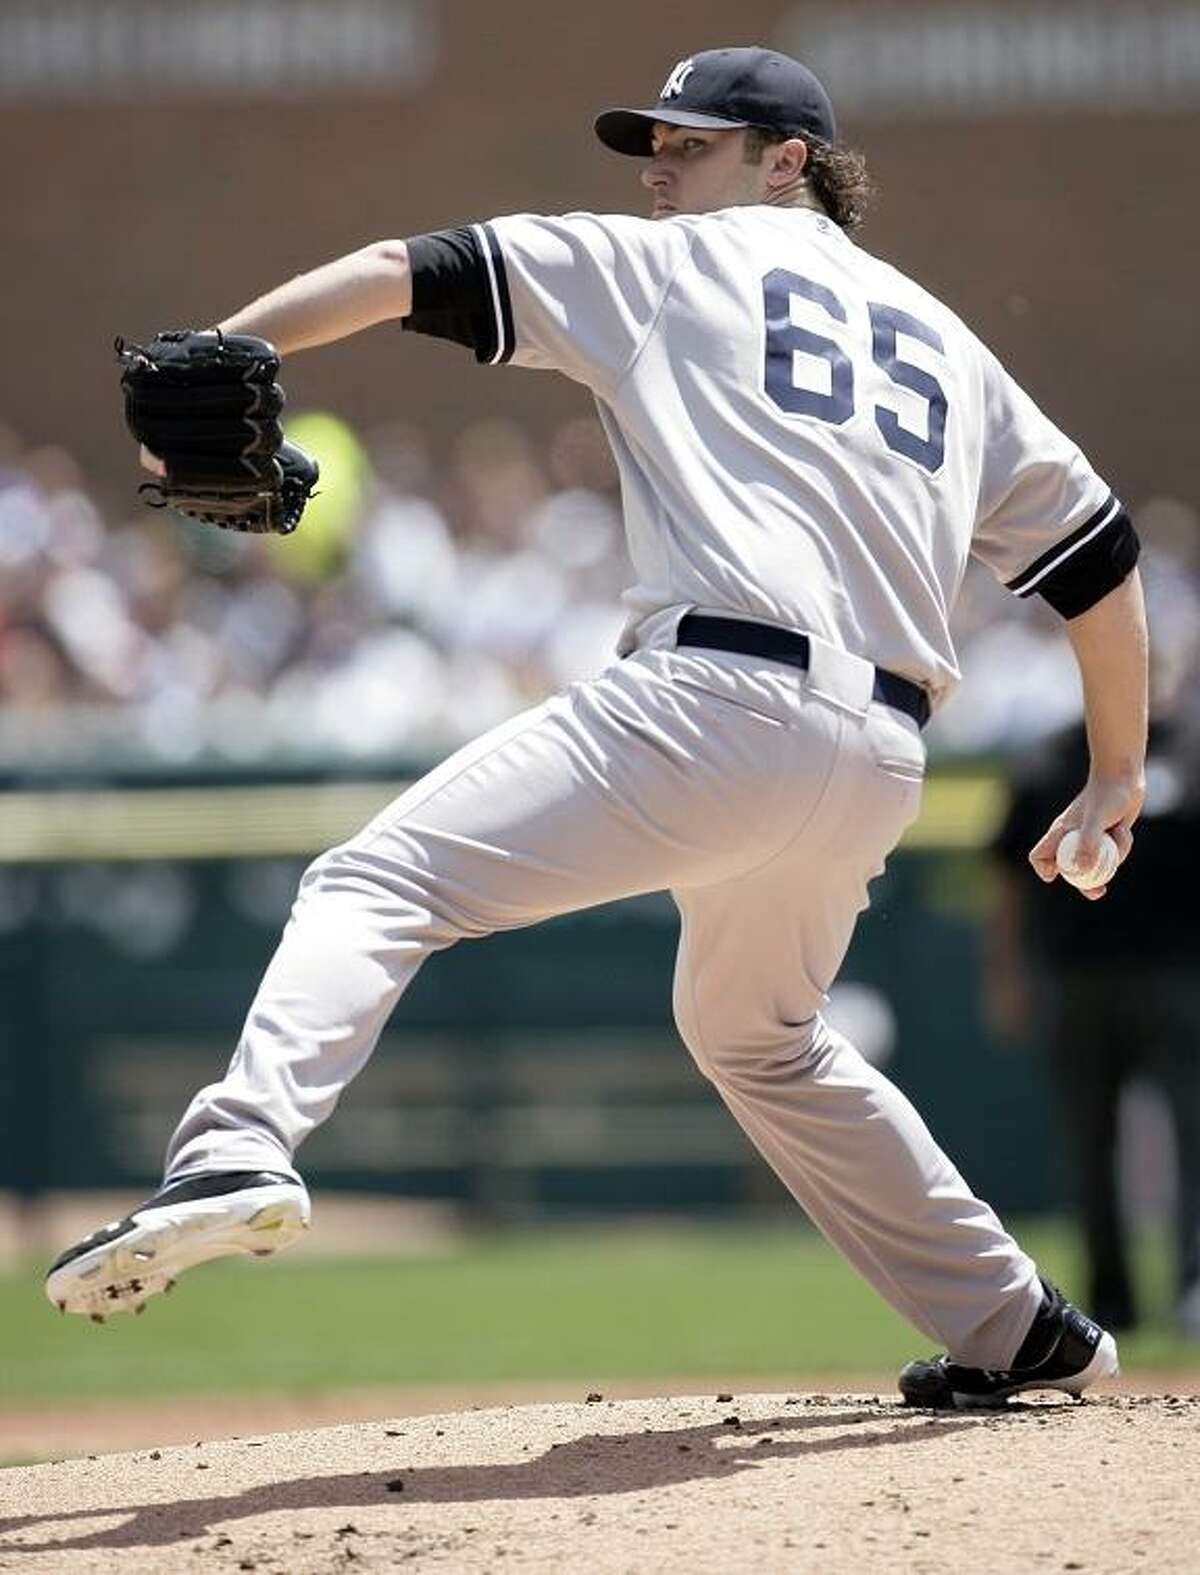 New York Yankees starter Phil Hughes pitches against the Detroit Tigers in the first inning of baseball game on Sunday, June 3, 2012, in Detroit. (AP Photo/Duane Burleson)